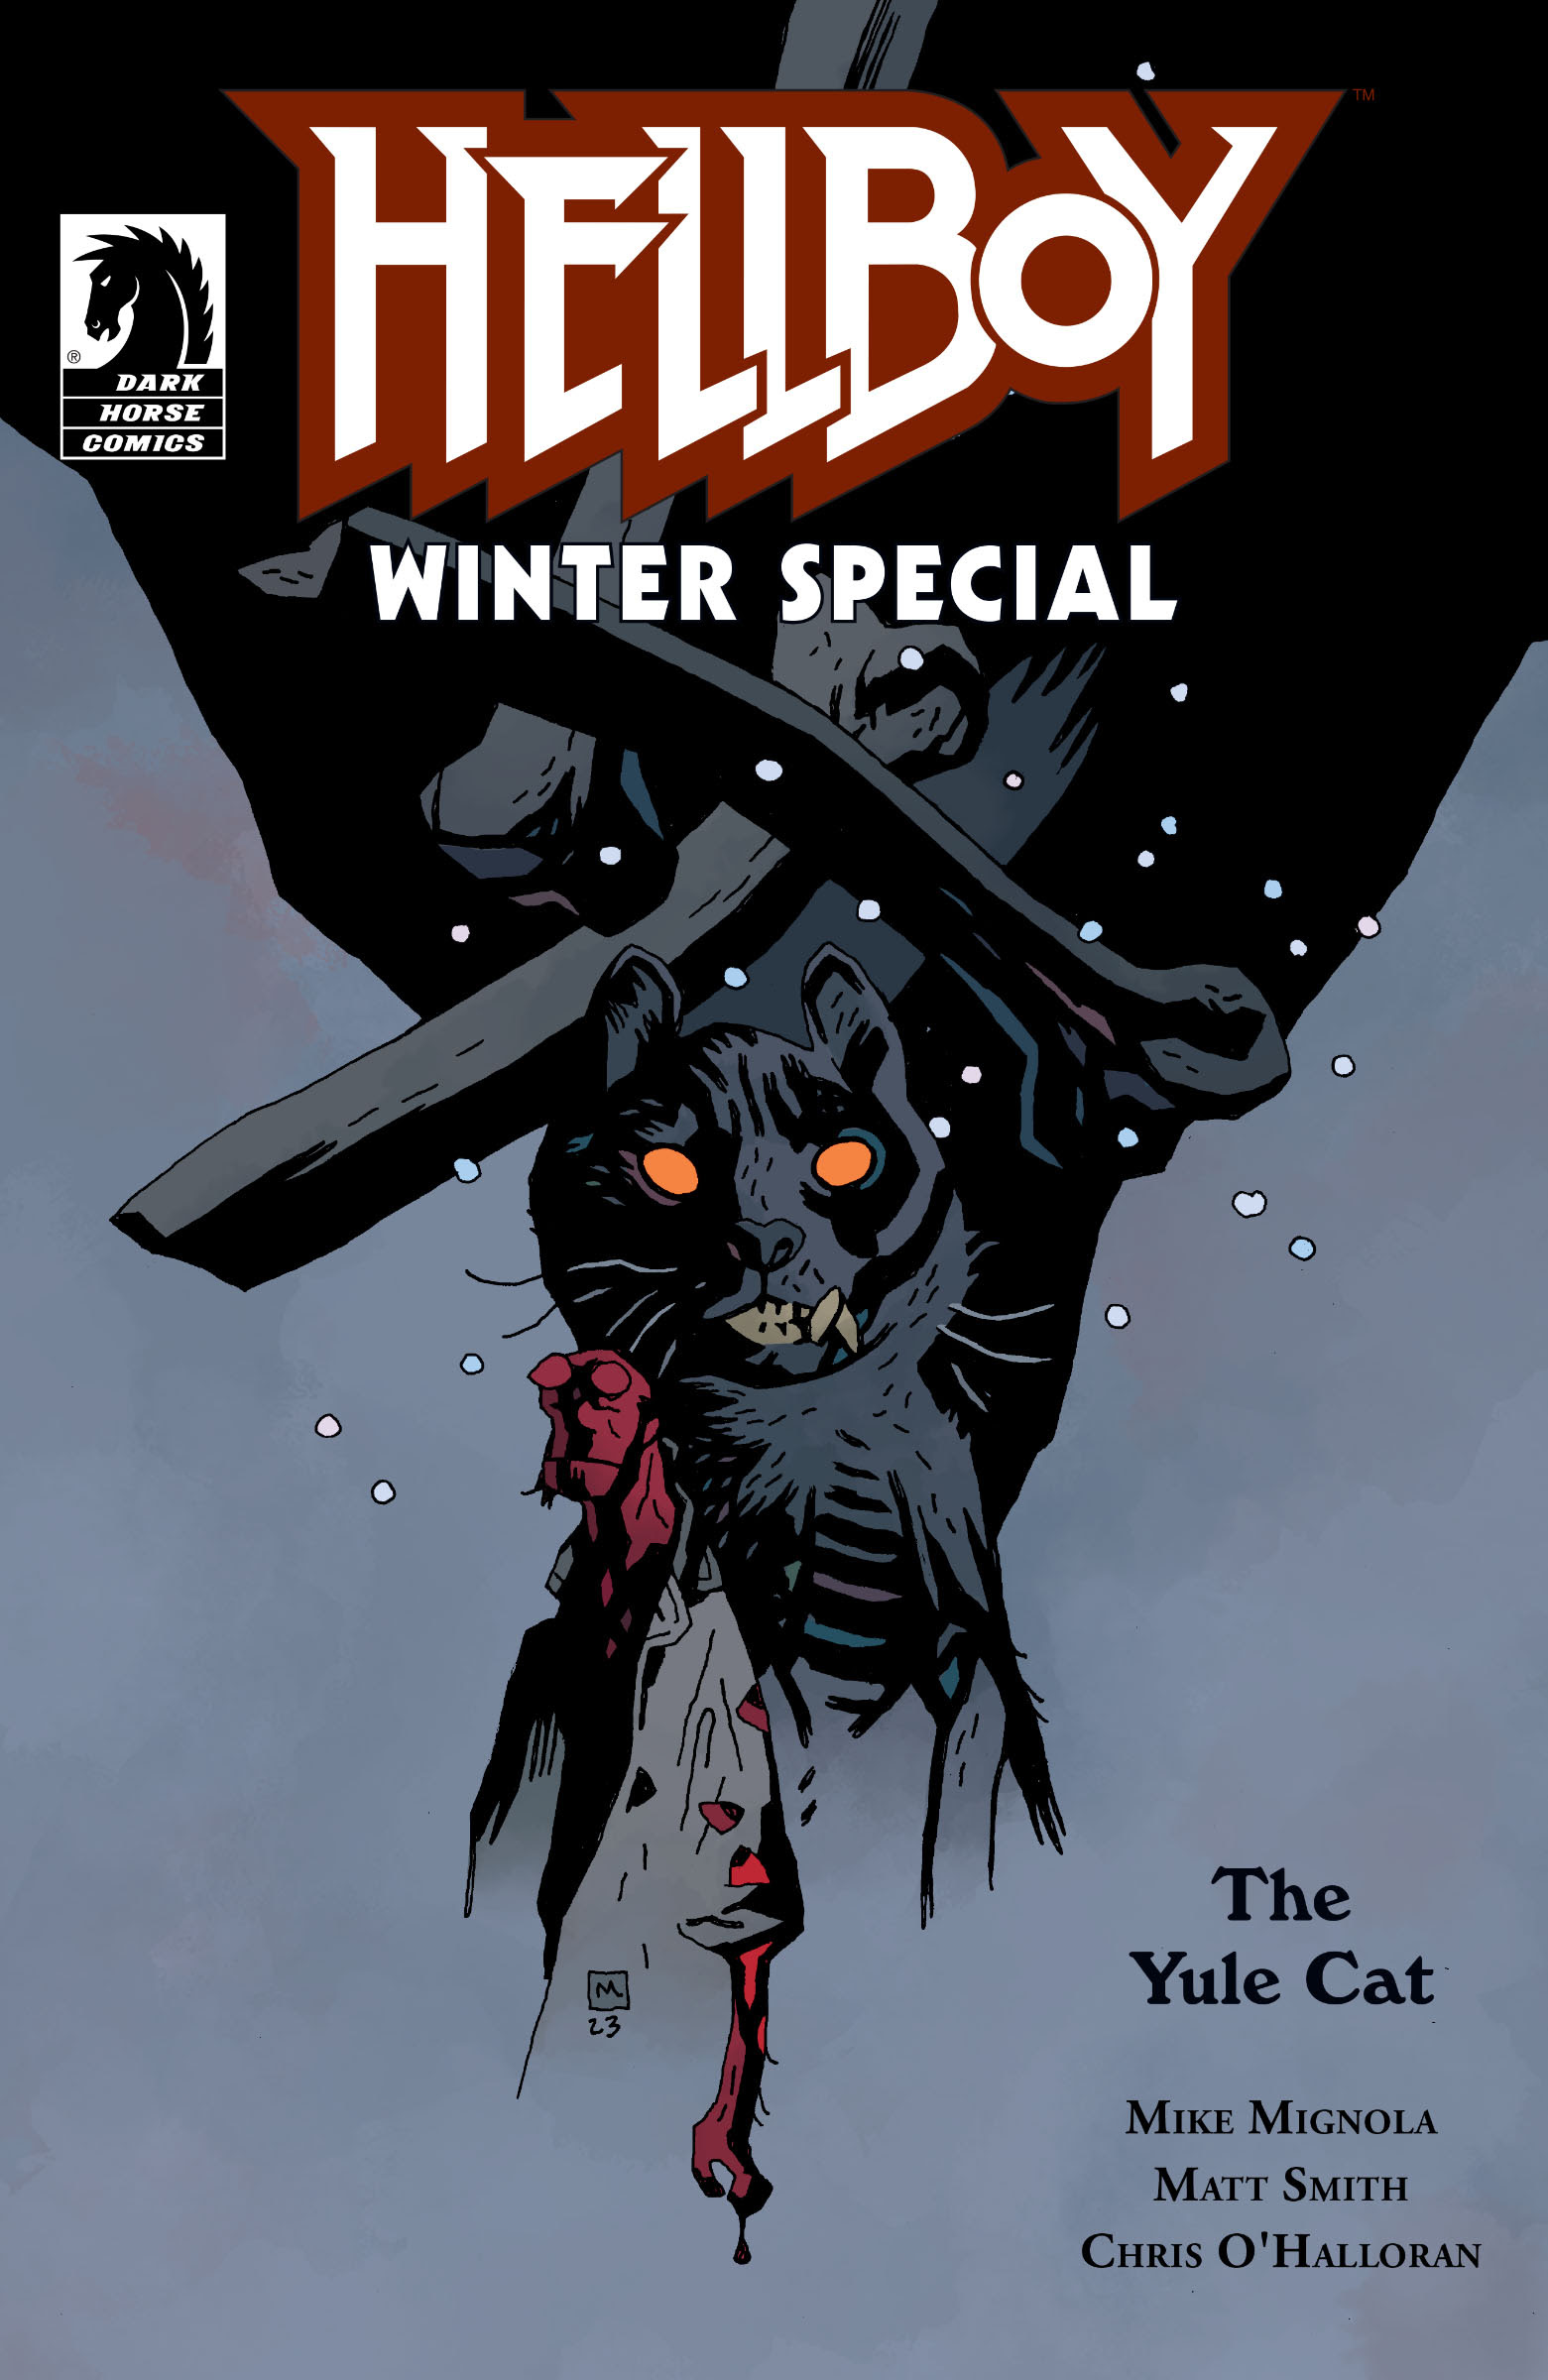 Hellboy Winter Special: The Yule Cat